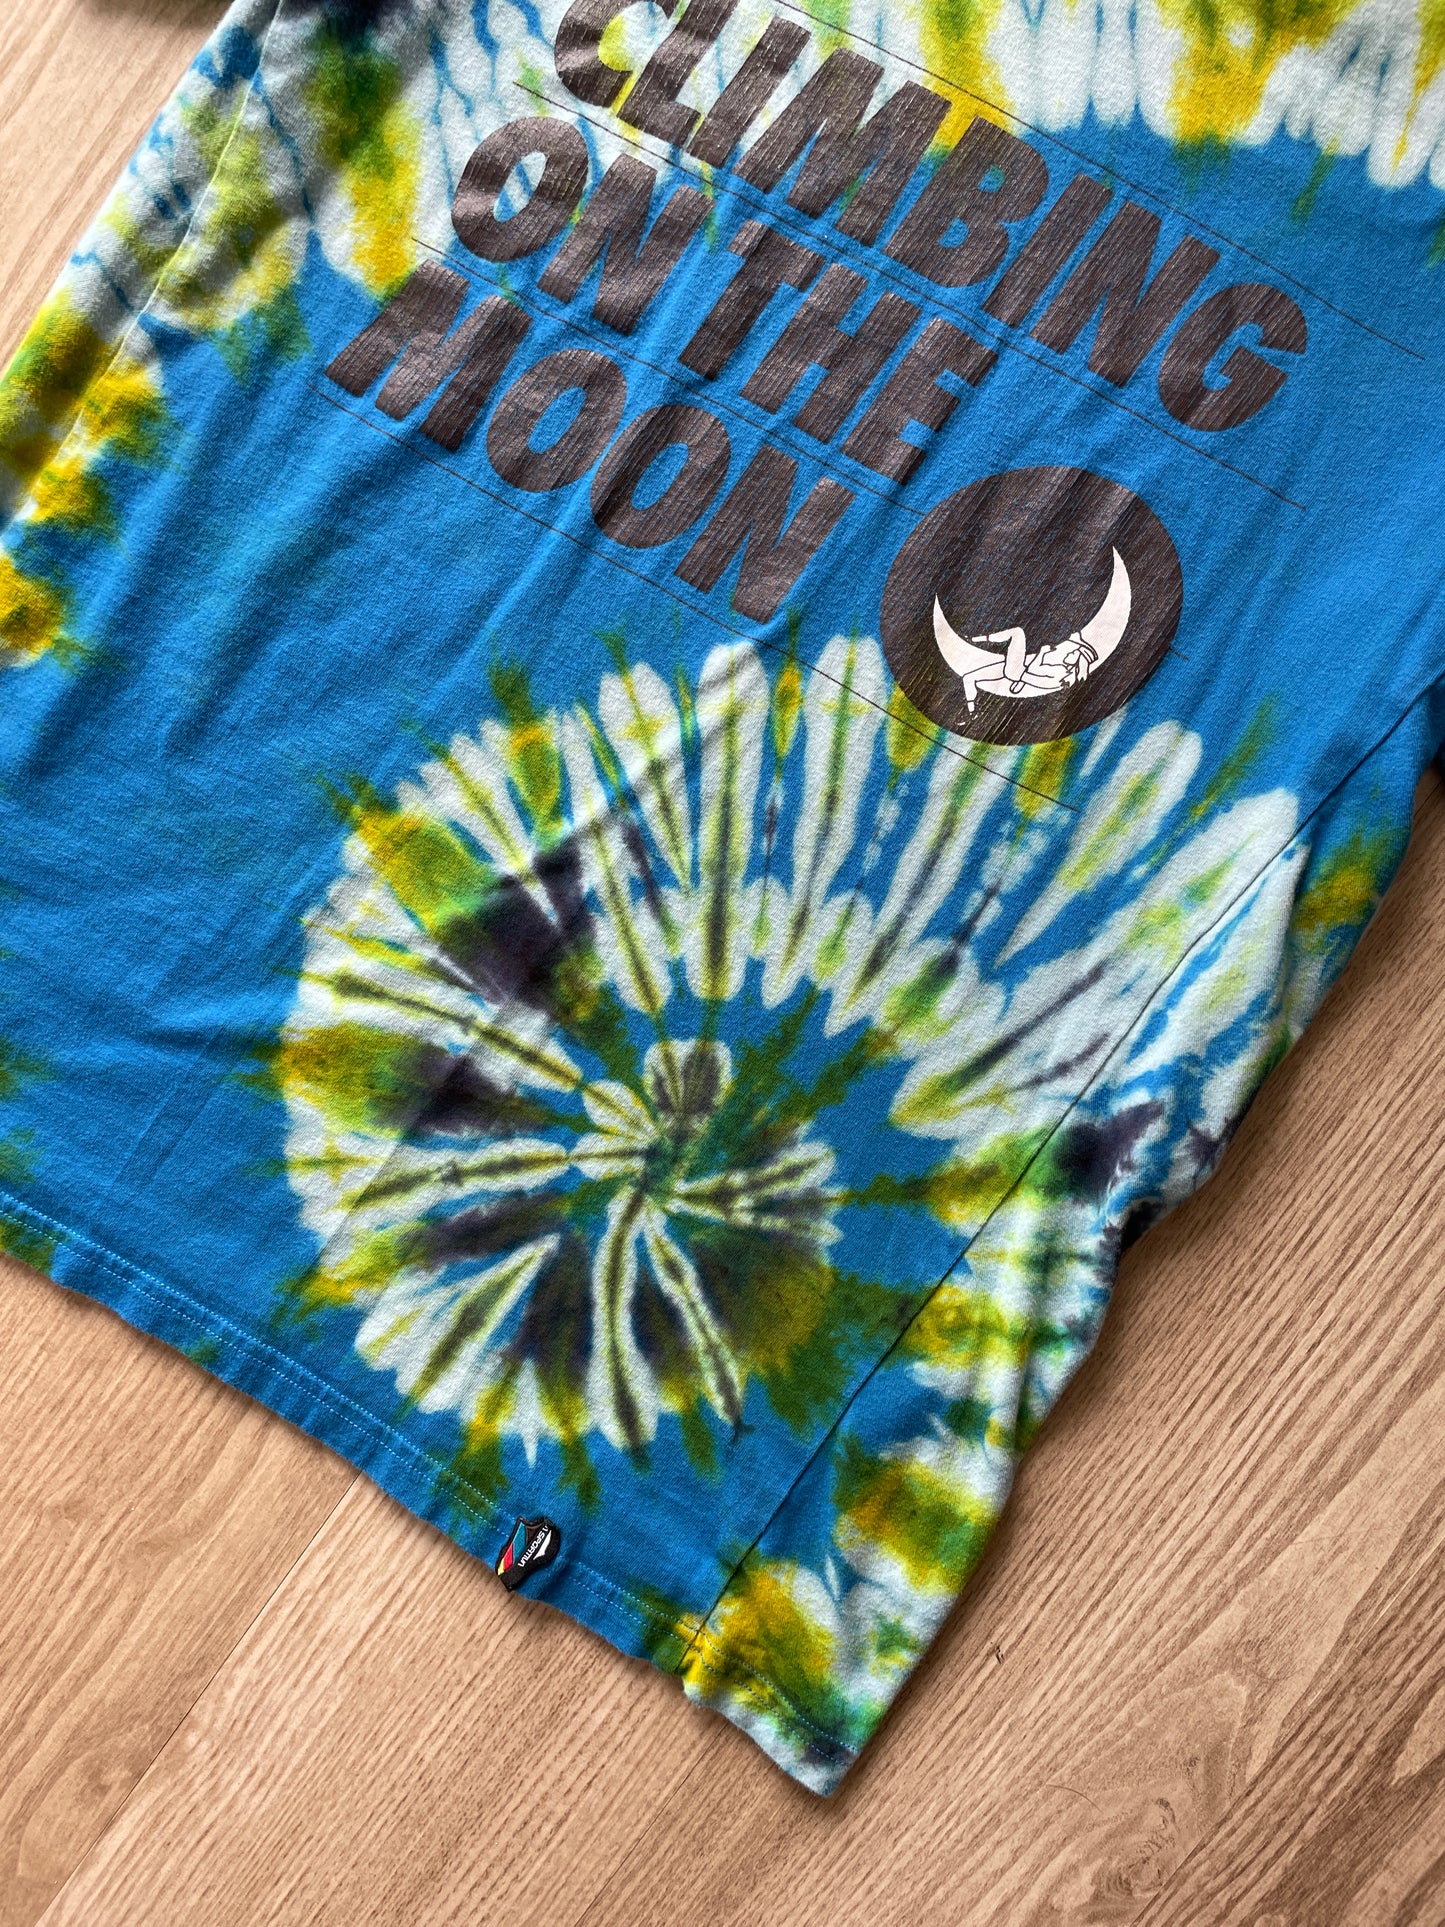 M/L Men’s La Sportiva Climbing On the Moon Handmade Tie Dye V-Neck T-Shirt | One-Of-a-Kind Blue and Green Short Sleeve